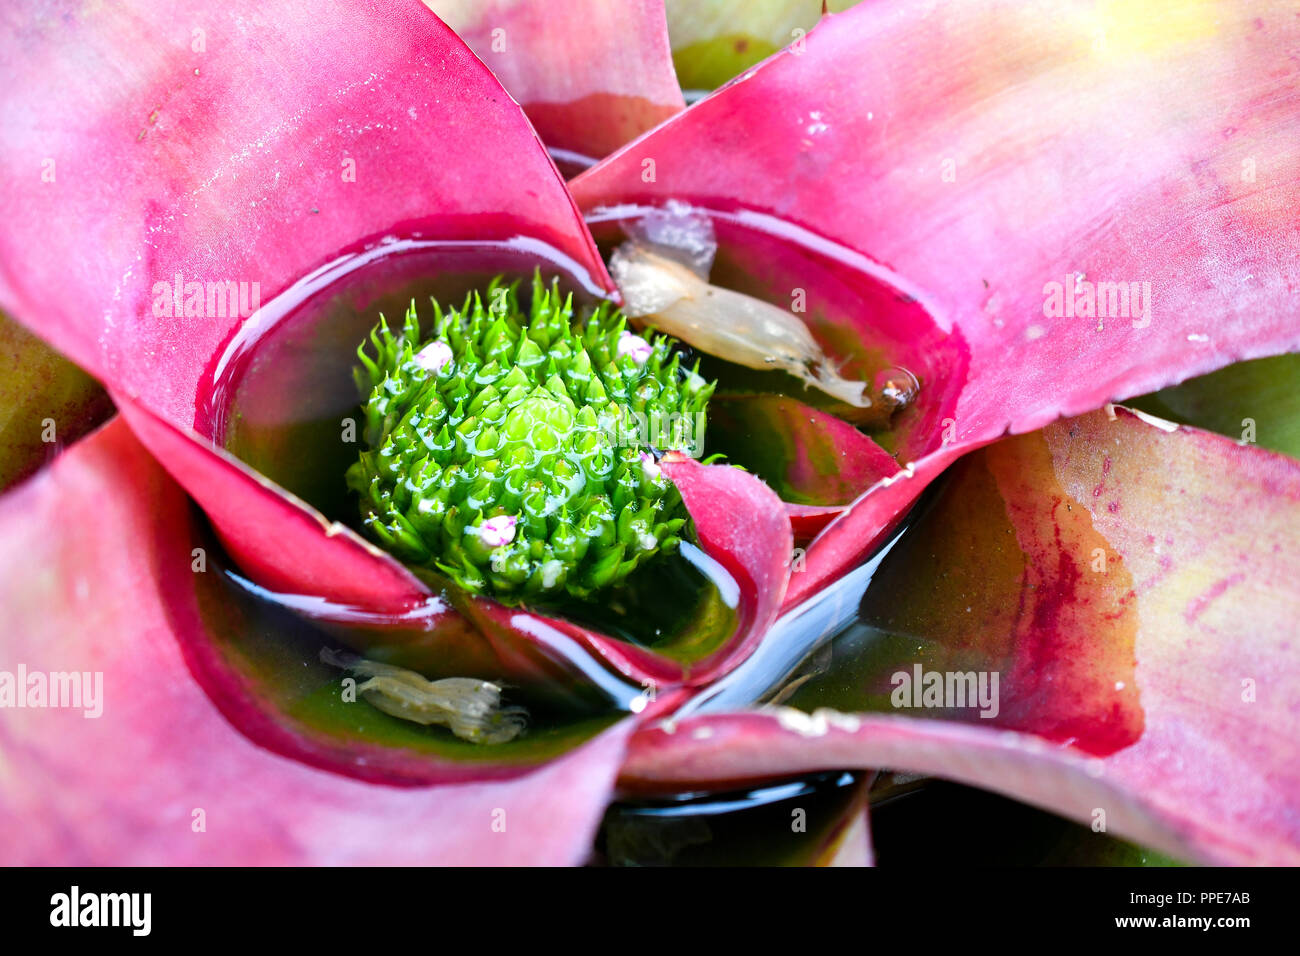 pink bromeliad plant with water tank Stock Photo